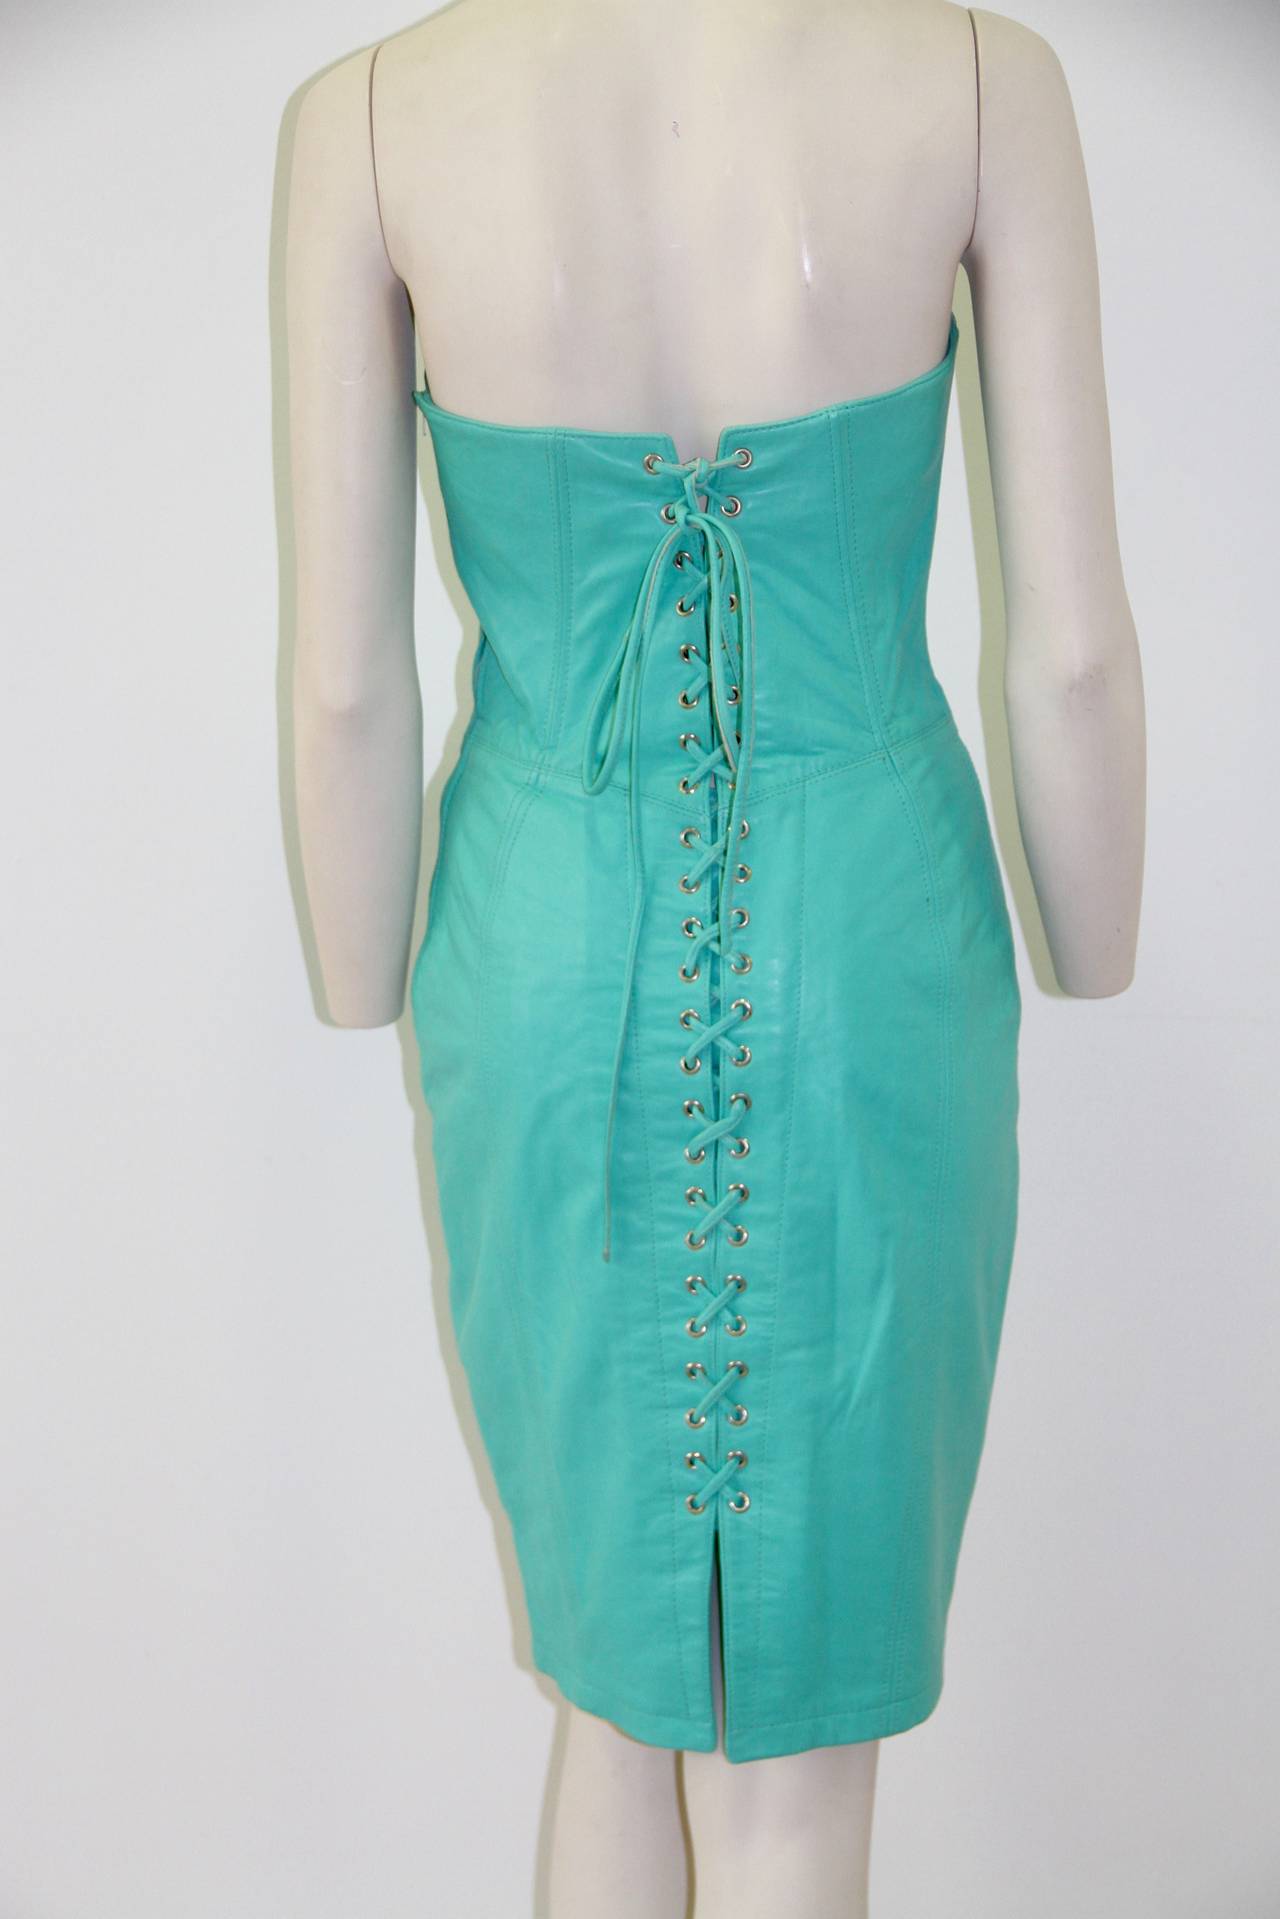 A rare 1980's Michael Hoban For North Beach Leather turquoise lace-up strapless dress.

Marked a Medium (US).